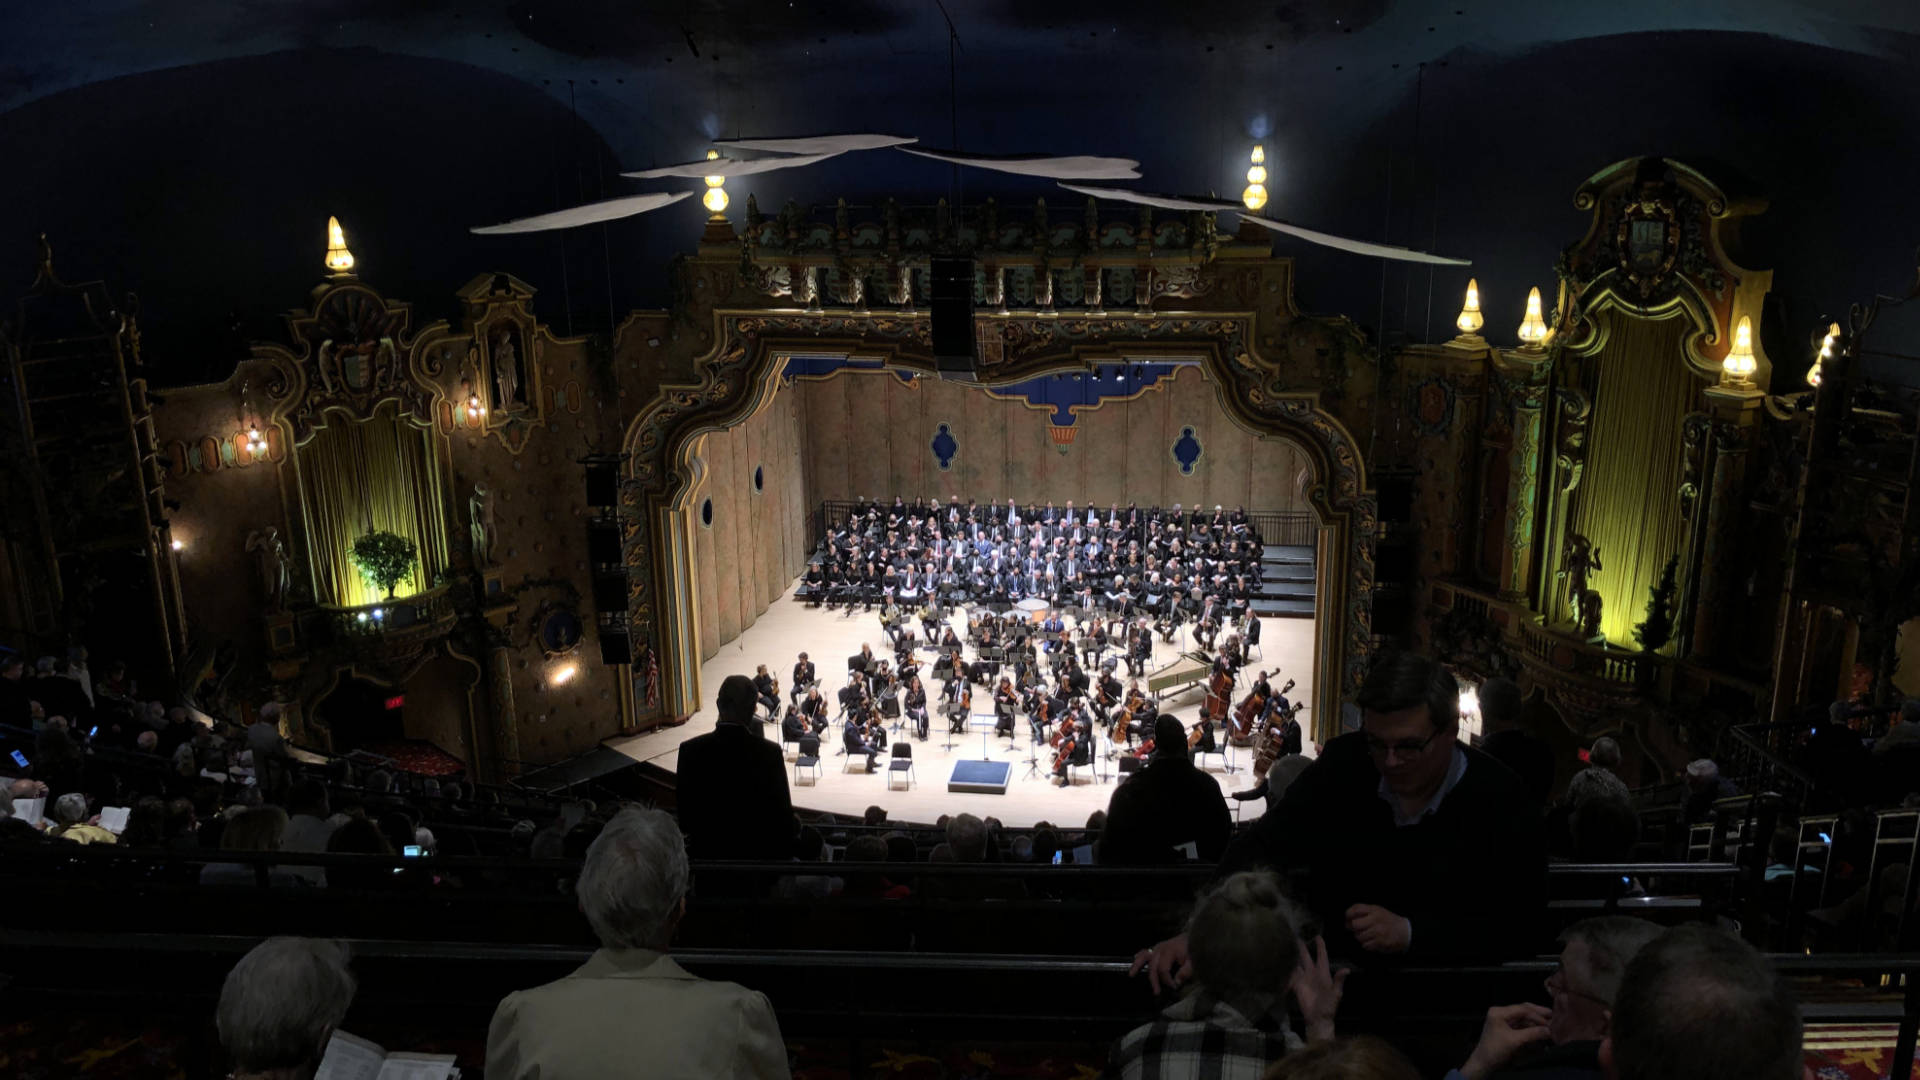 The Symphony Chorus on stage at a beautiful historic theater.